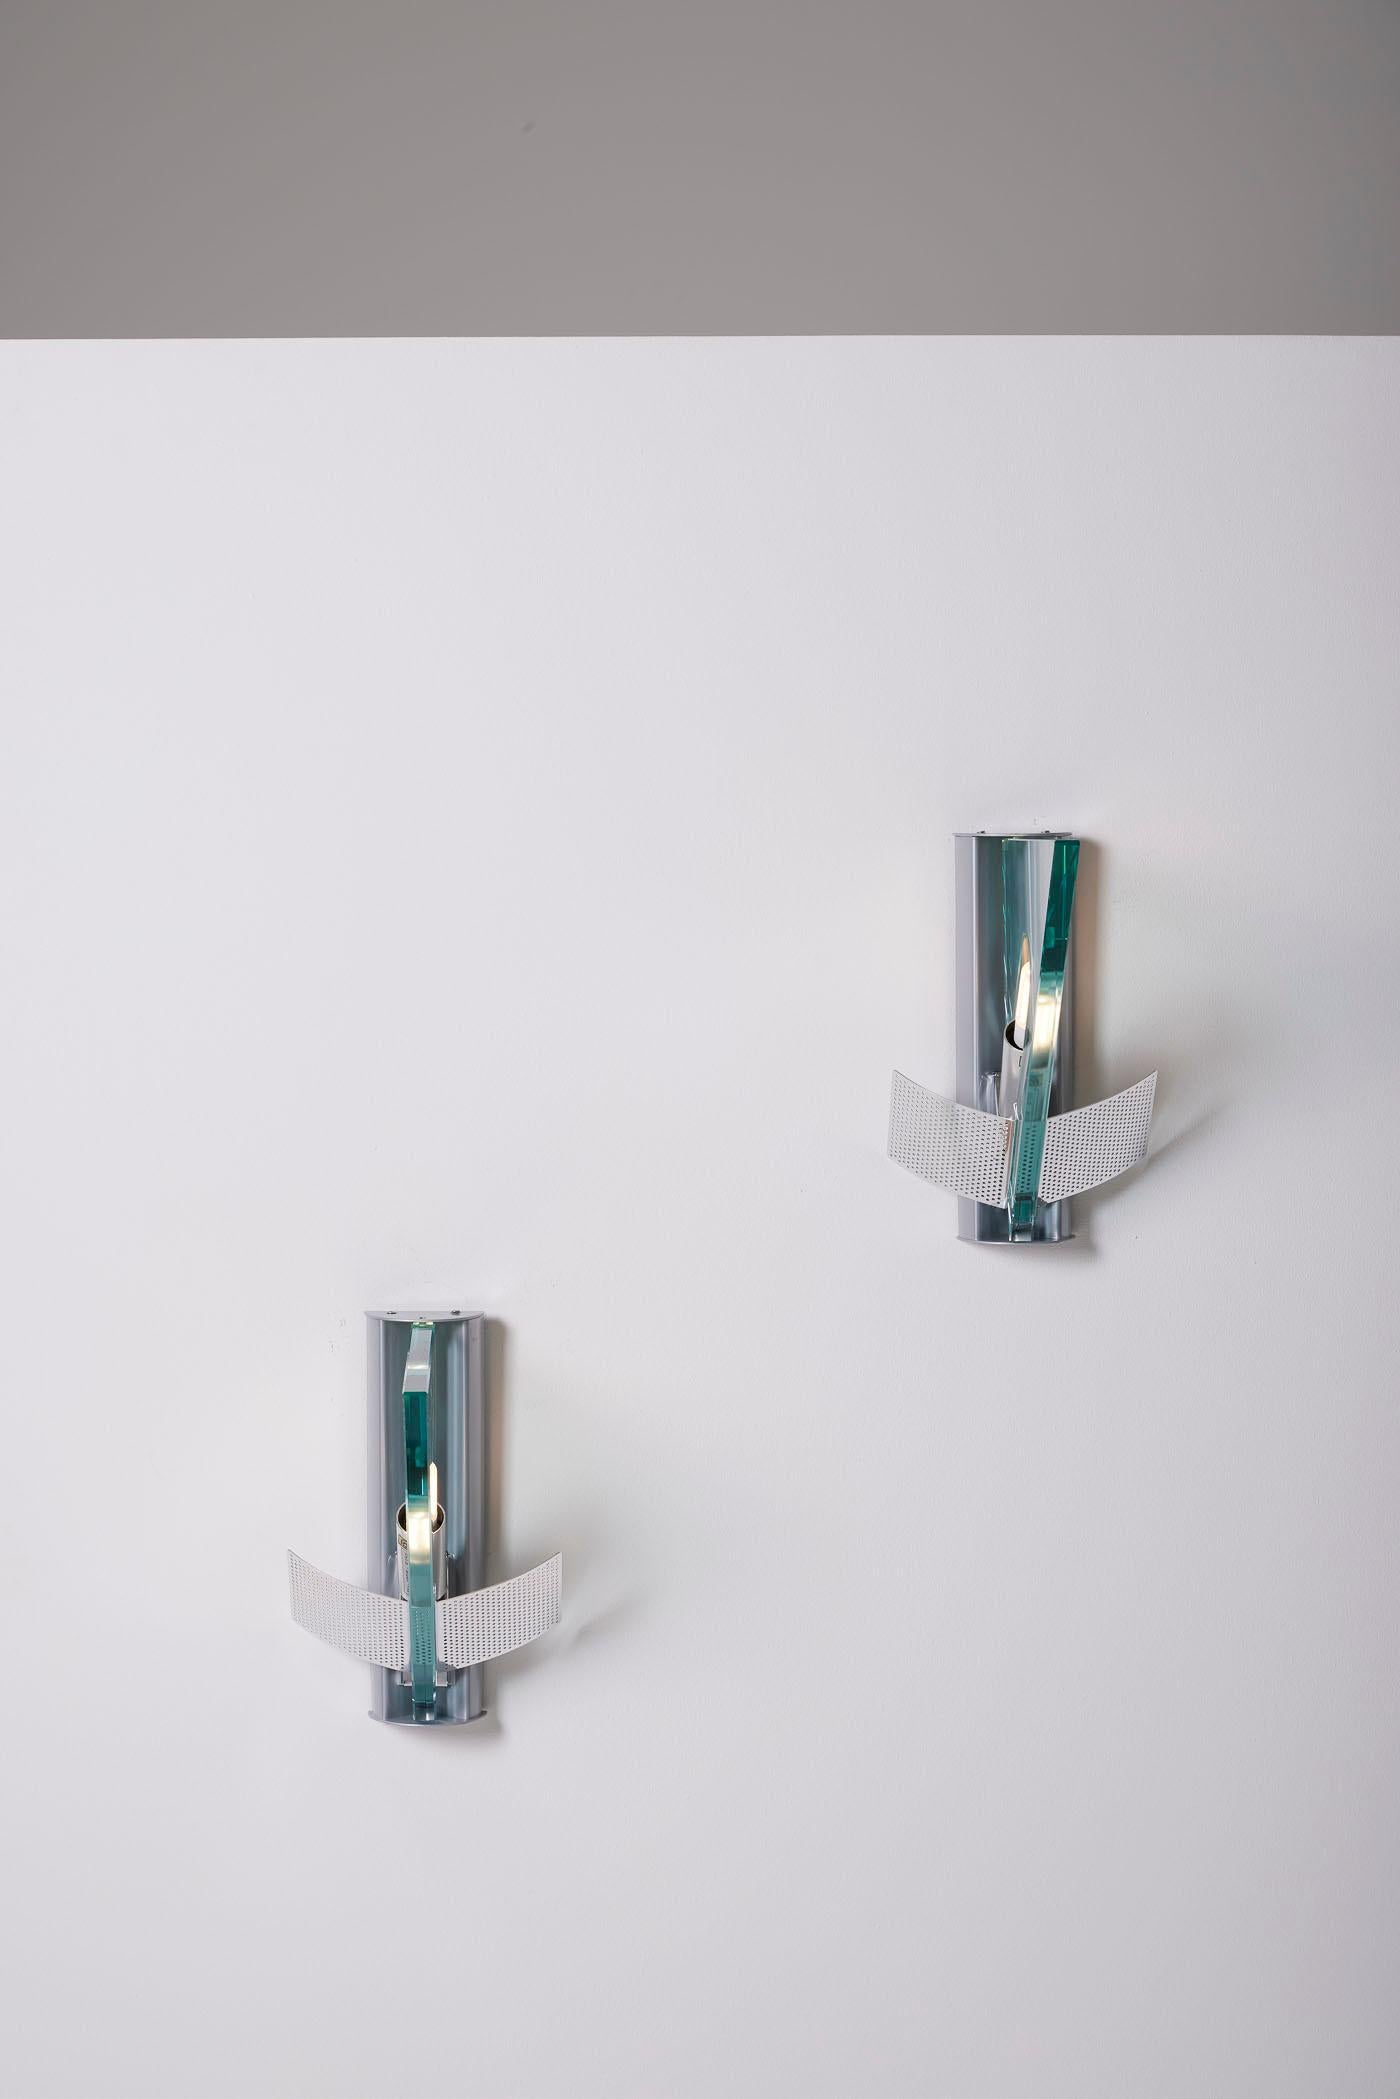 Pair of wall sconces, Icaro model, designed by Carlo Forcolini for Artemide in the 1980s. These sconces are made of metal and glass, with a perforated metal reflector. Very good condition.
LP1973